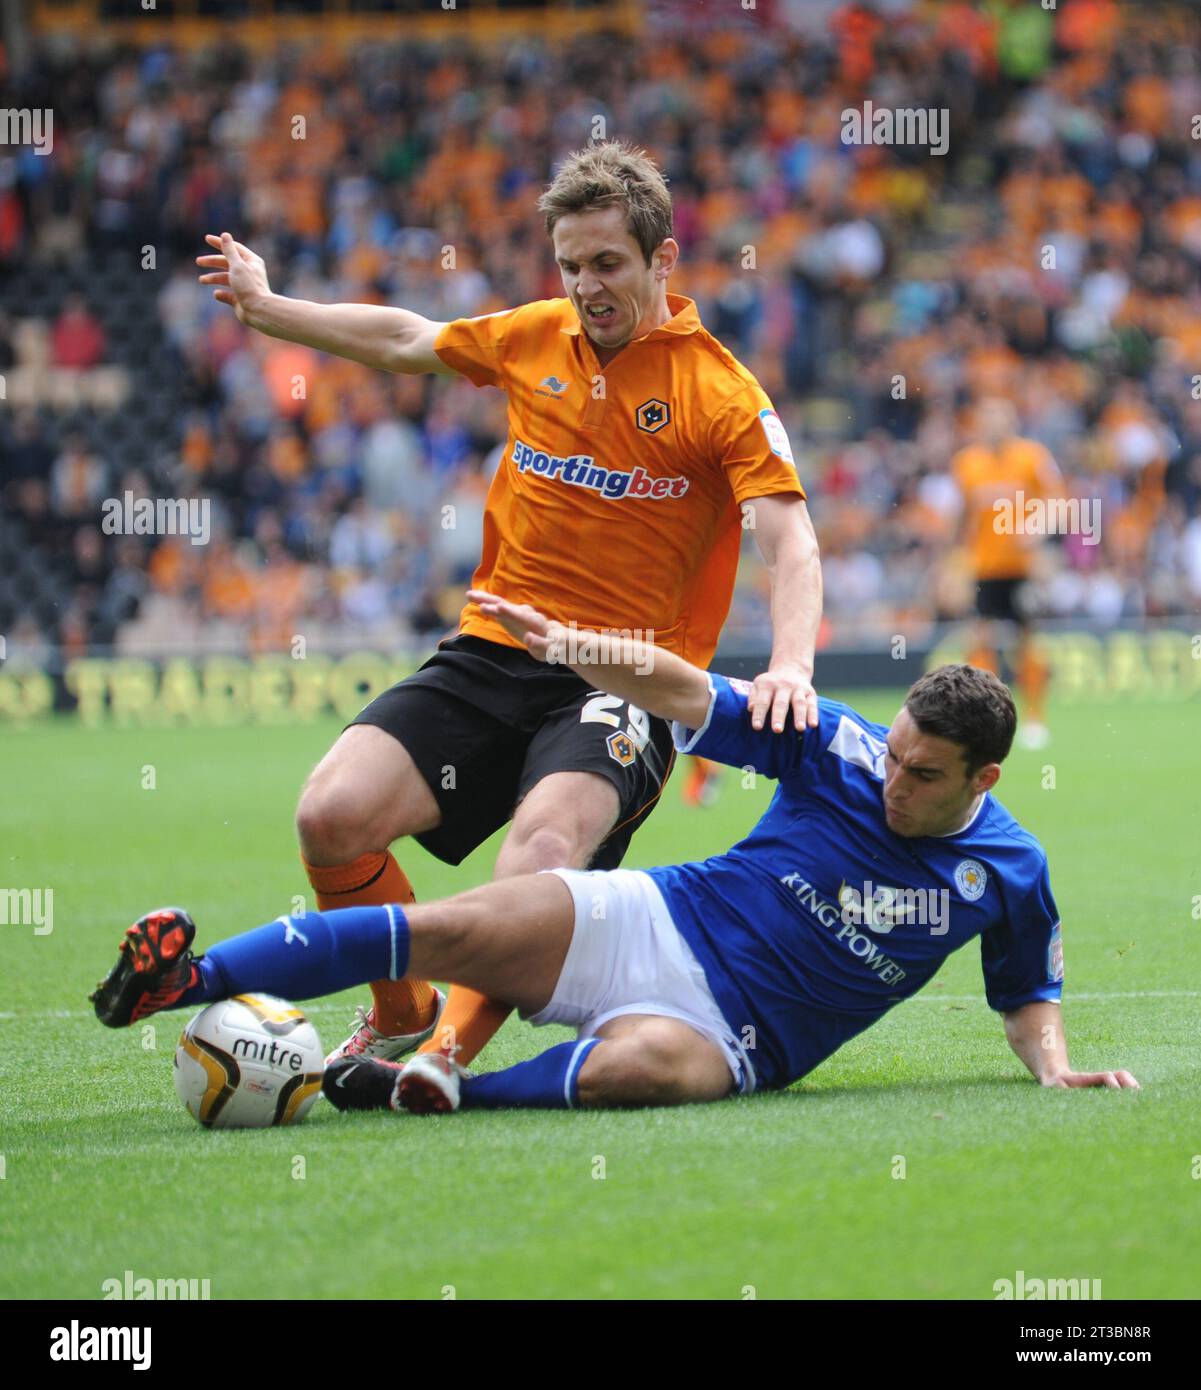 Kevin Doyle of Wolverhampton Wanderers and Matthew James of Leicester City. Football League Championship - Wolverhampton Wanderers v Leicester City 16/09/2012 Stock Photo